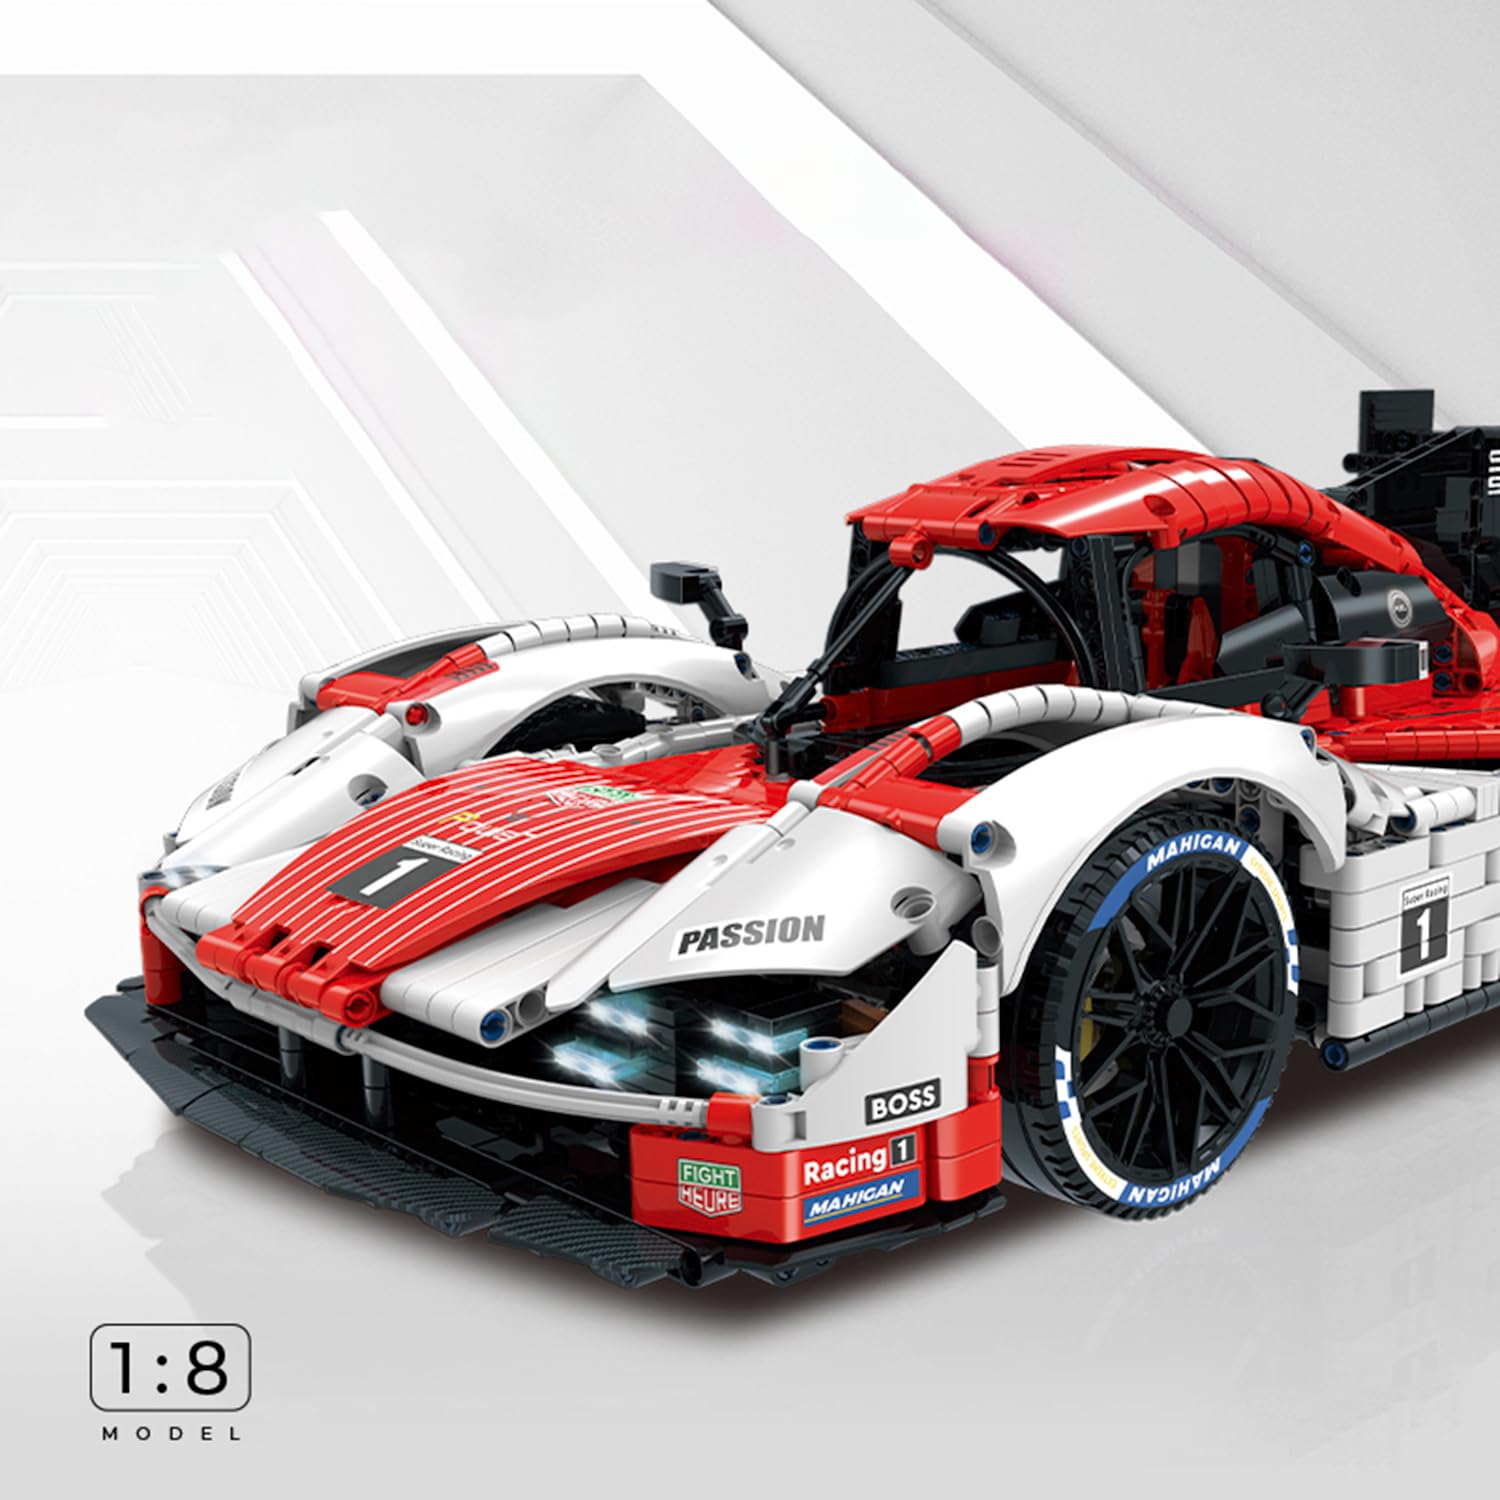 UNCLE BRICK Pro 963 technic Car Model Building Kit,1:8 Scale Model and Race Engineering Toy,Collectible Sports Car Construction Kit for Boys,Compatible with LEGO Technic Car Sets for Adults(3460pcs)